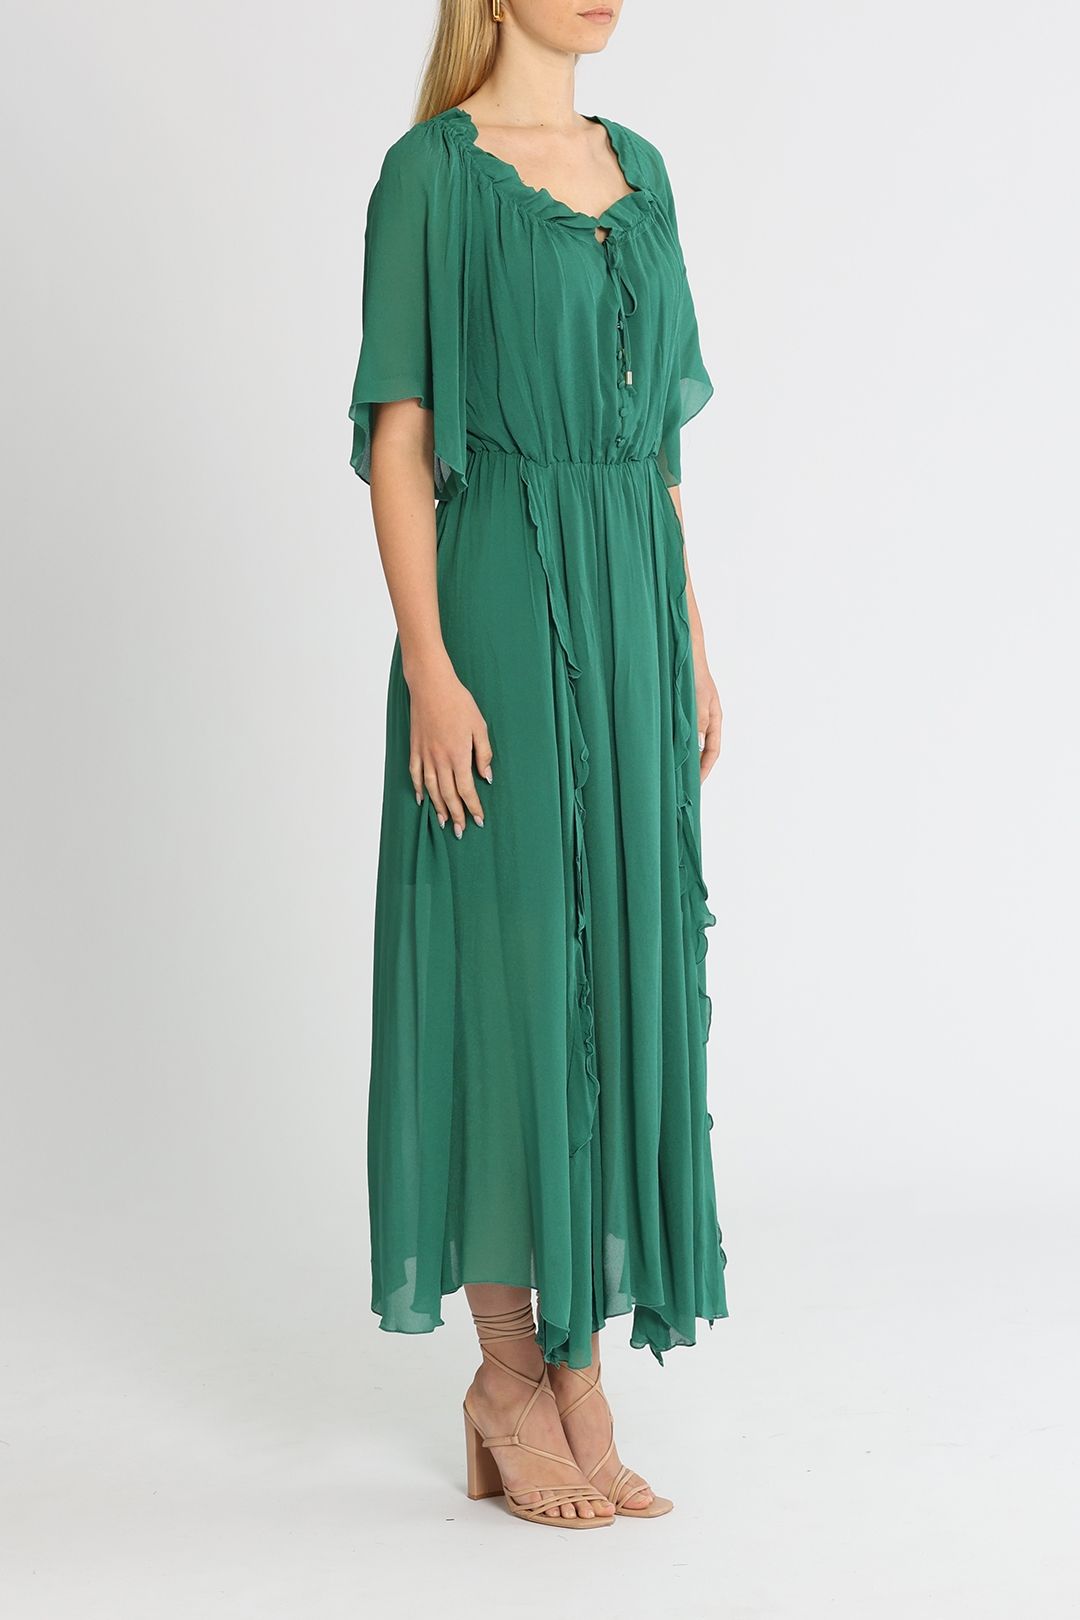 Belle and Bloom Amour Amour Midi Dress Green Ruffles